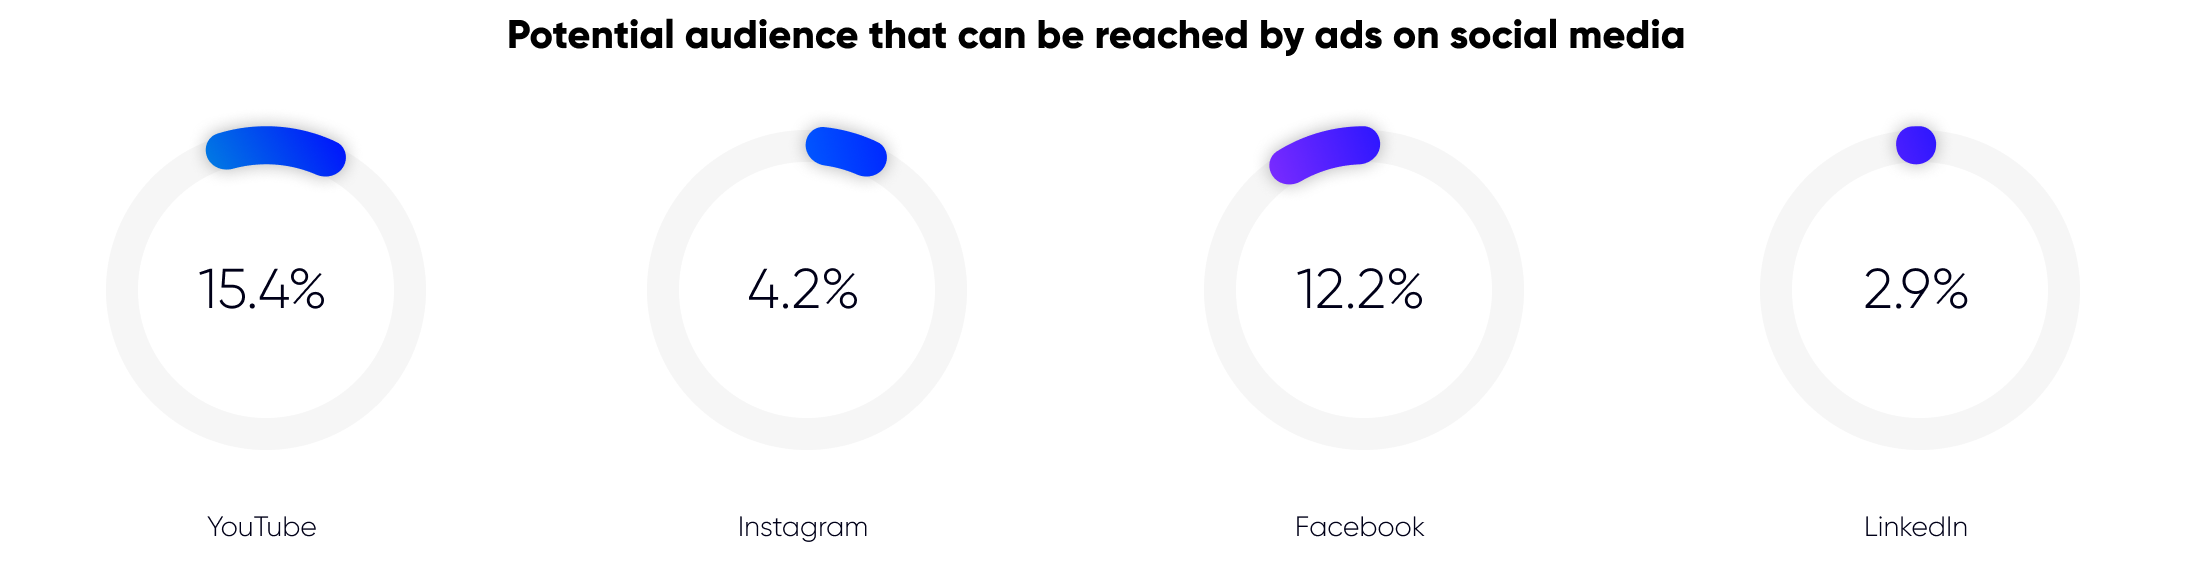 Potential audience that can be reach by ads on social media in Nigeria